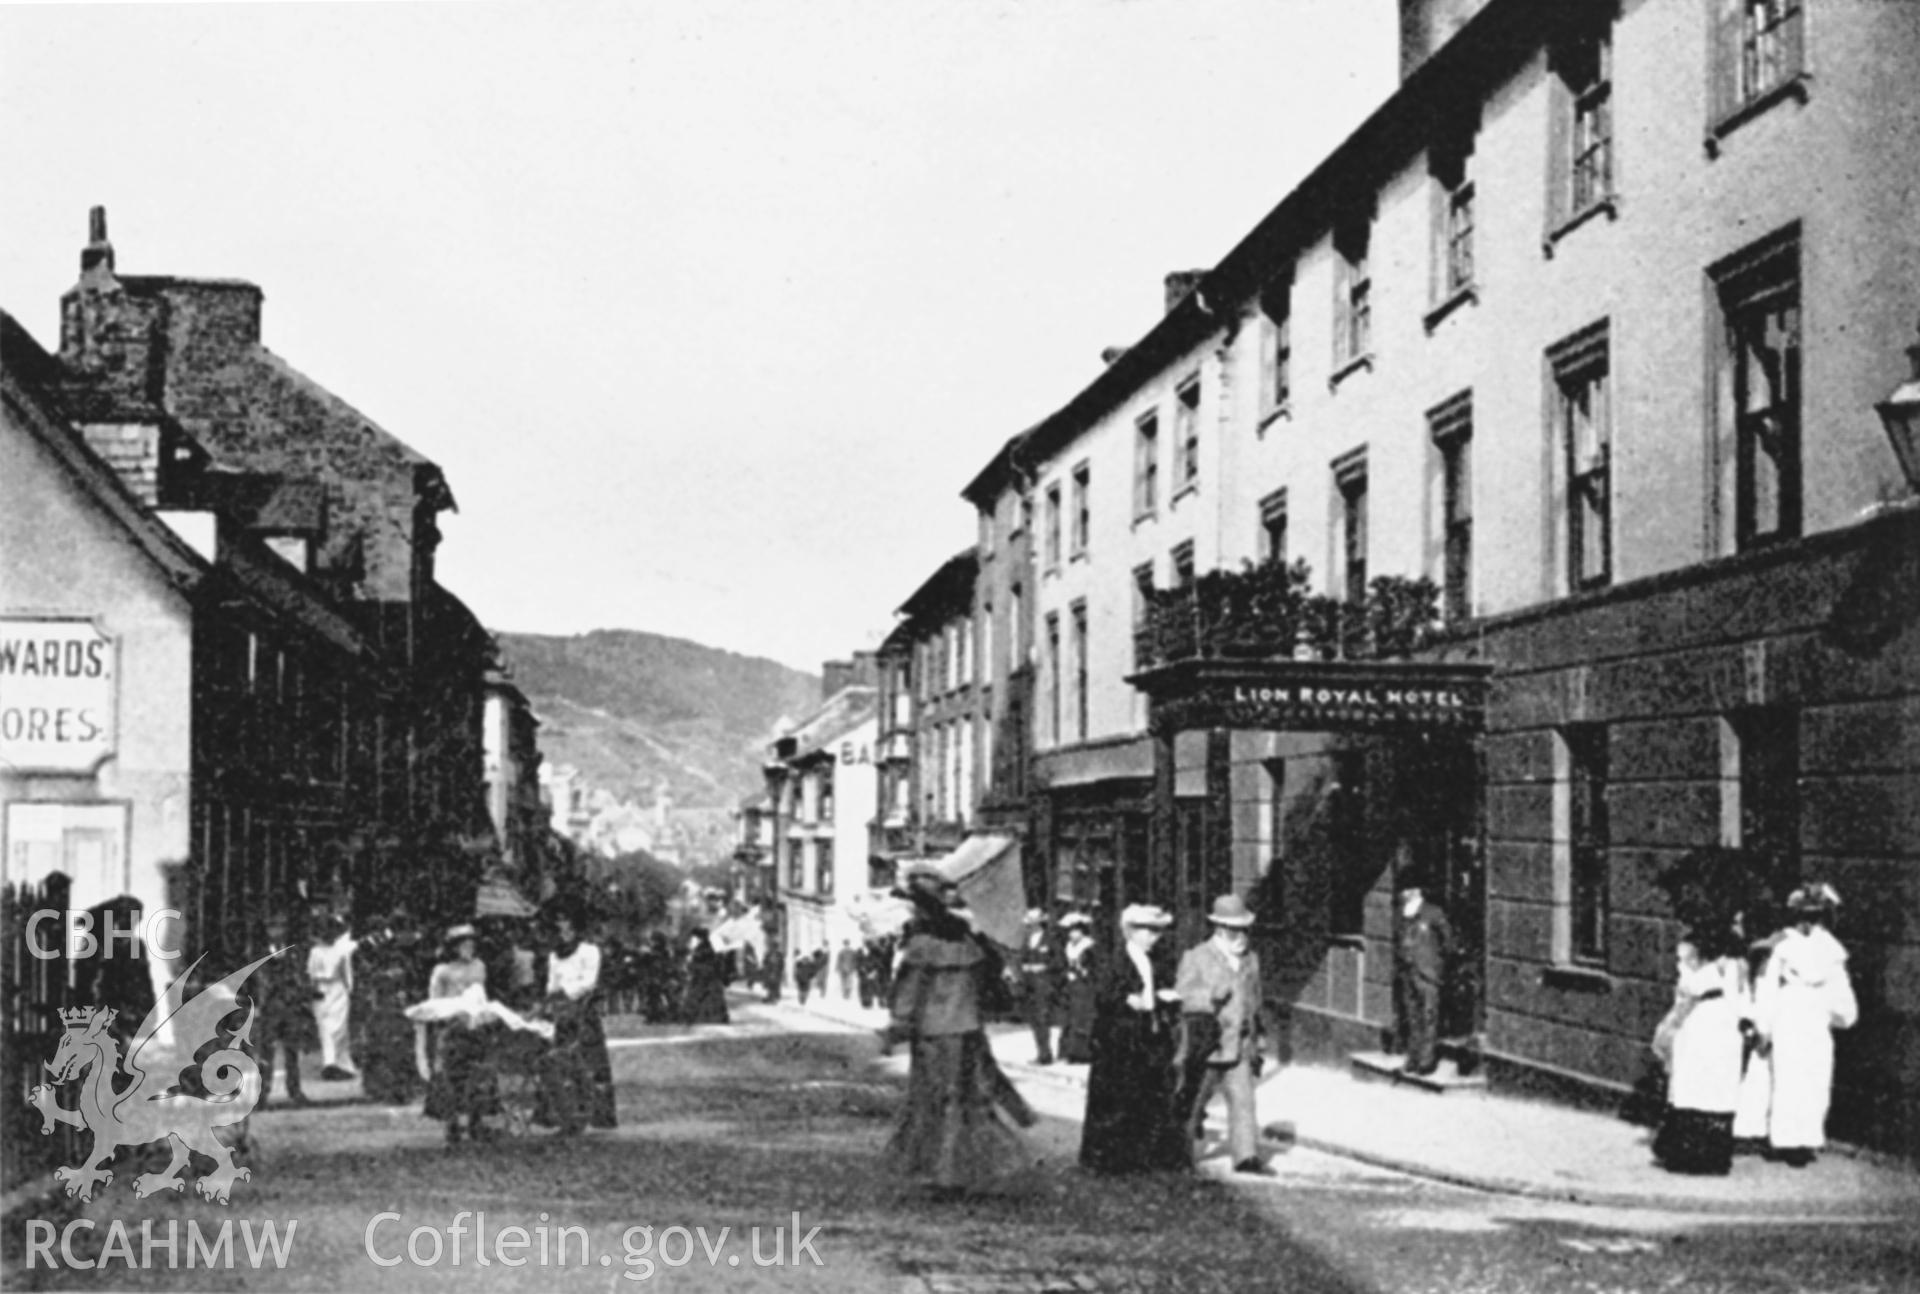 Copy of black and white image of Aberystwyth Town, copied from early photograph showing Great Darkgate Street, loaned by David Williams.